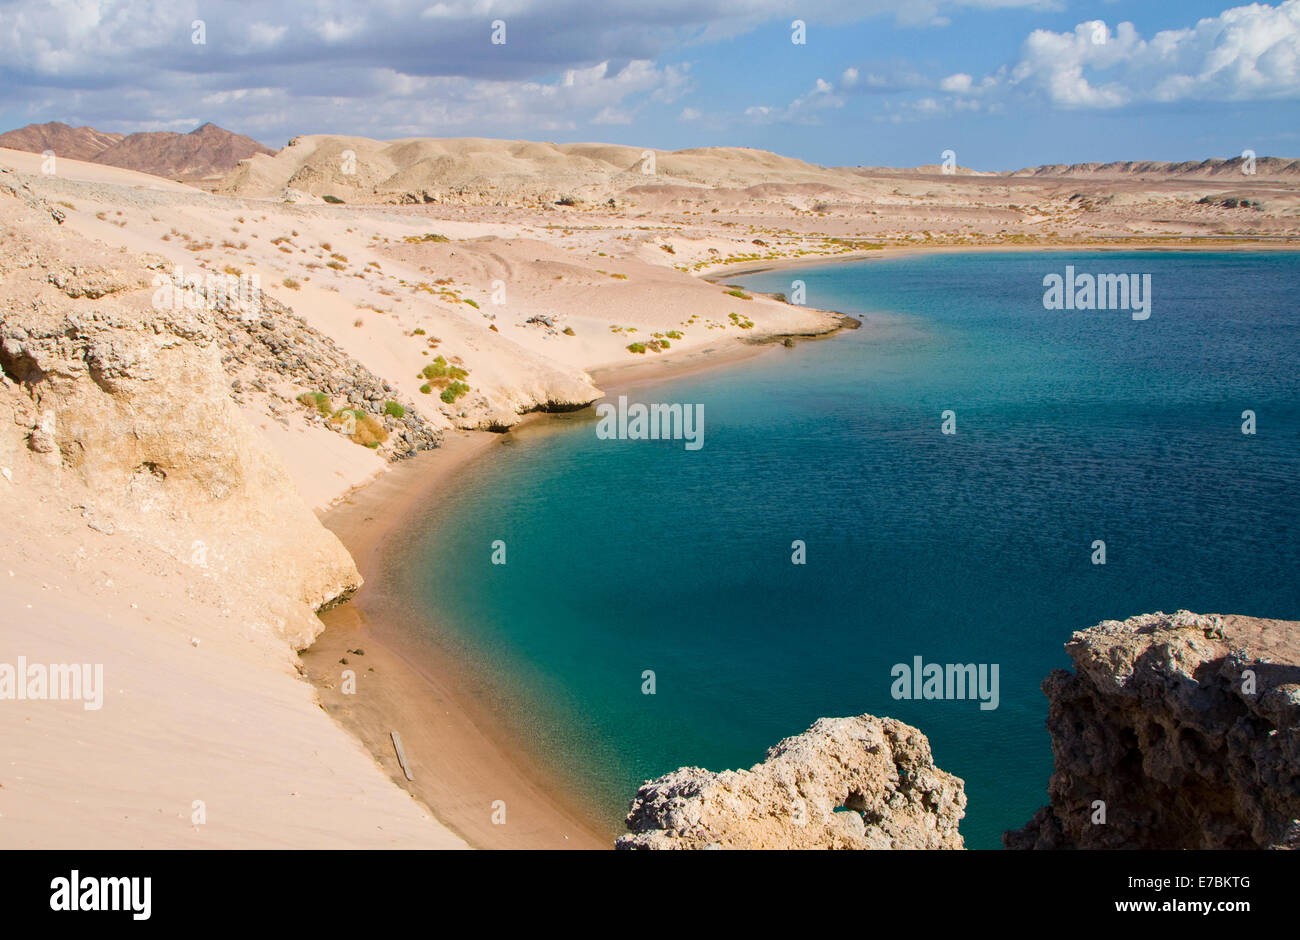 turtle bay on the Red Sea in Egypt Stock Photo